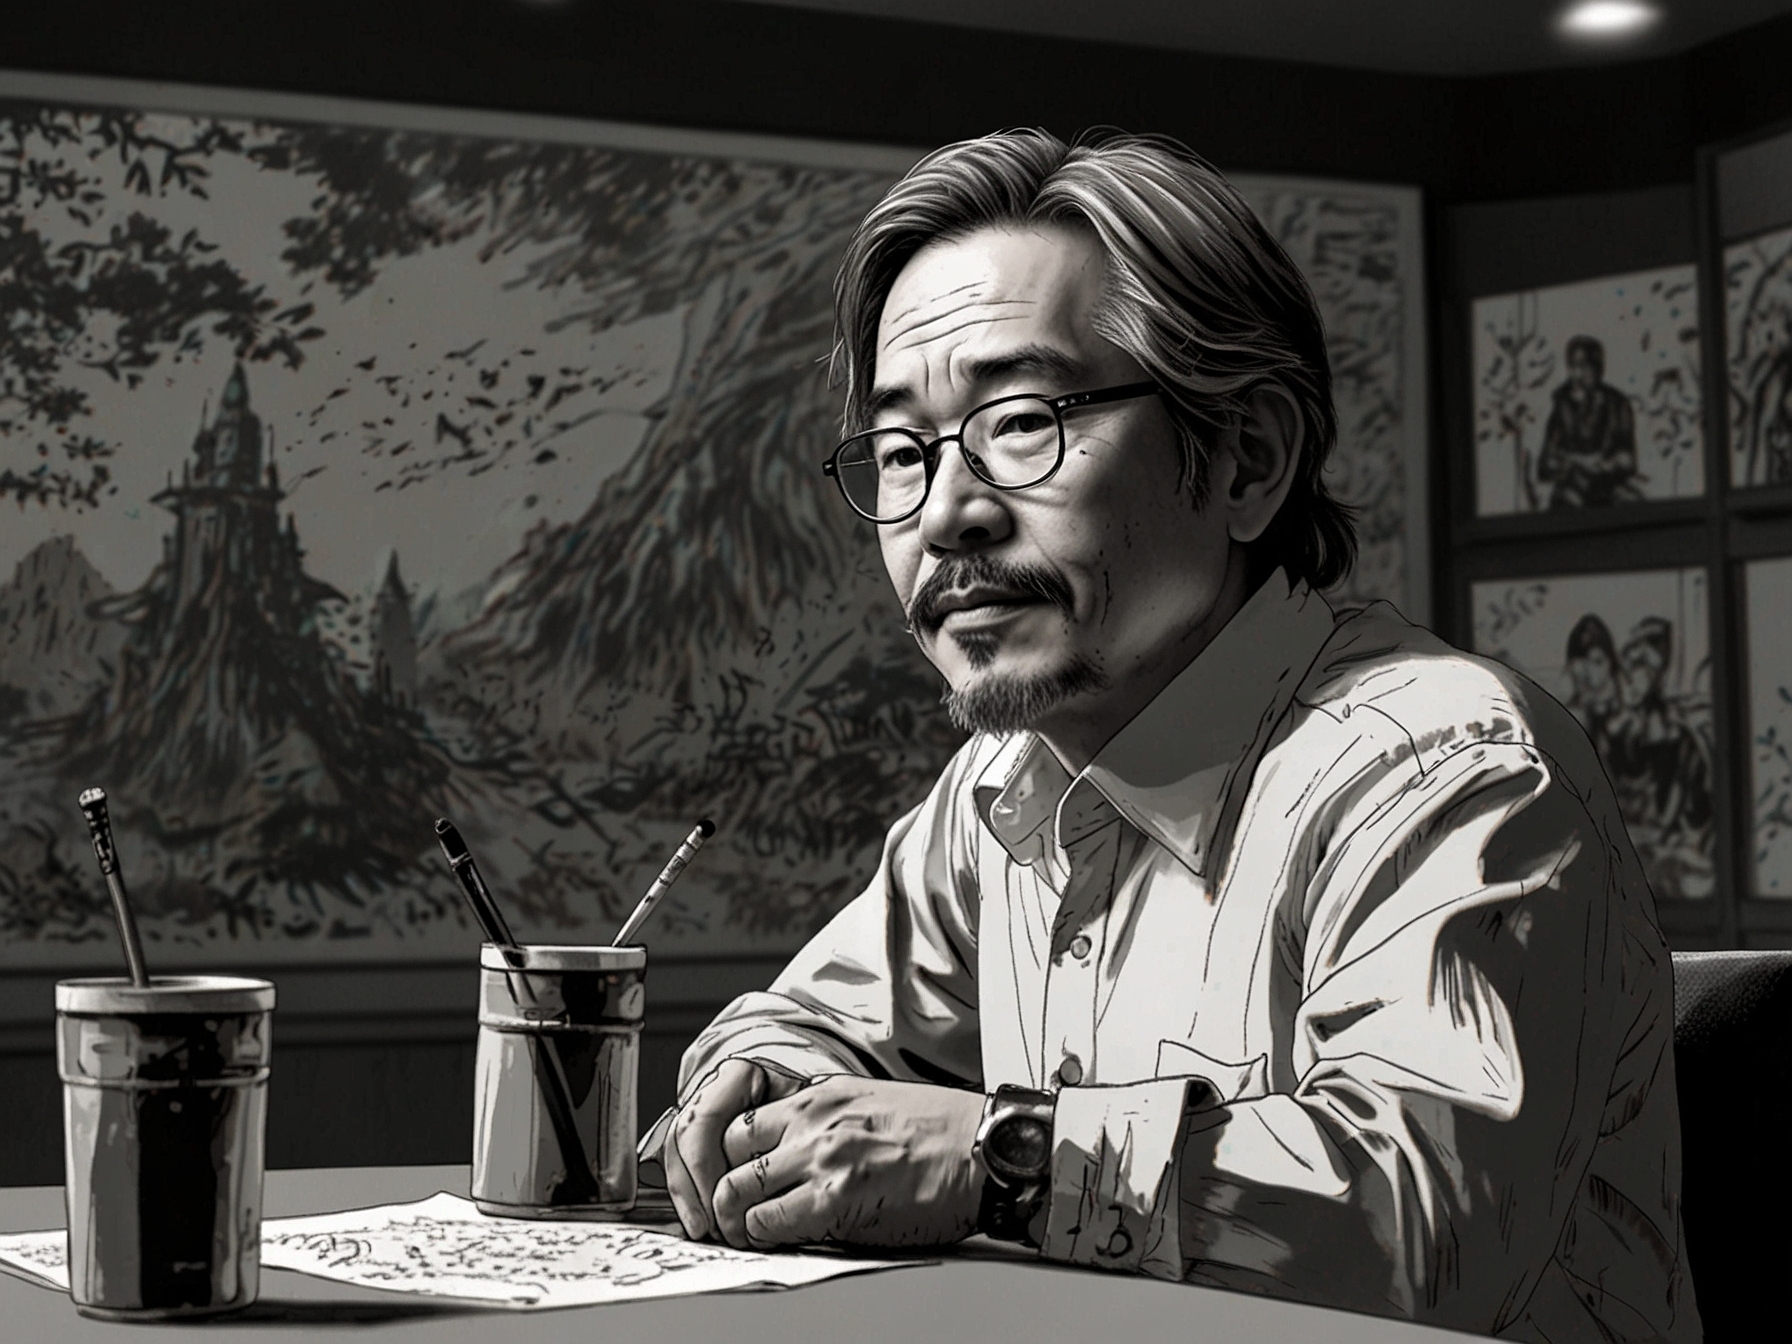 An image of Hidetaka Miyazaki at a press conference, reflecting on Elden Ring with the game’s magical world artwork in the background, illustrating his openness to a movie adaptation.